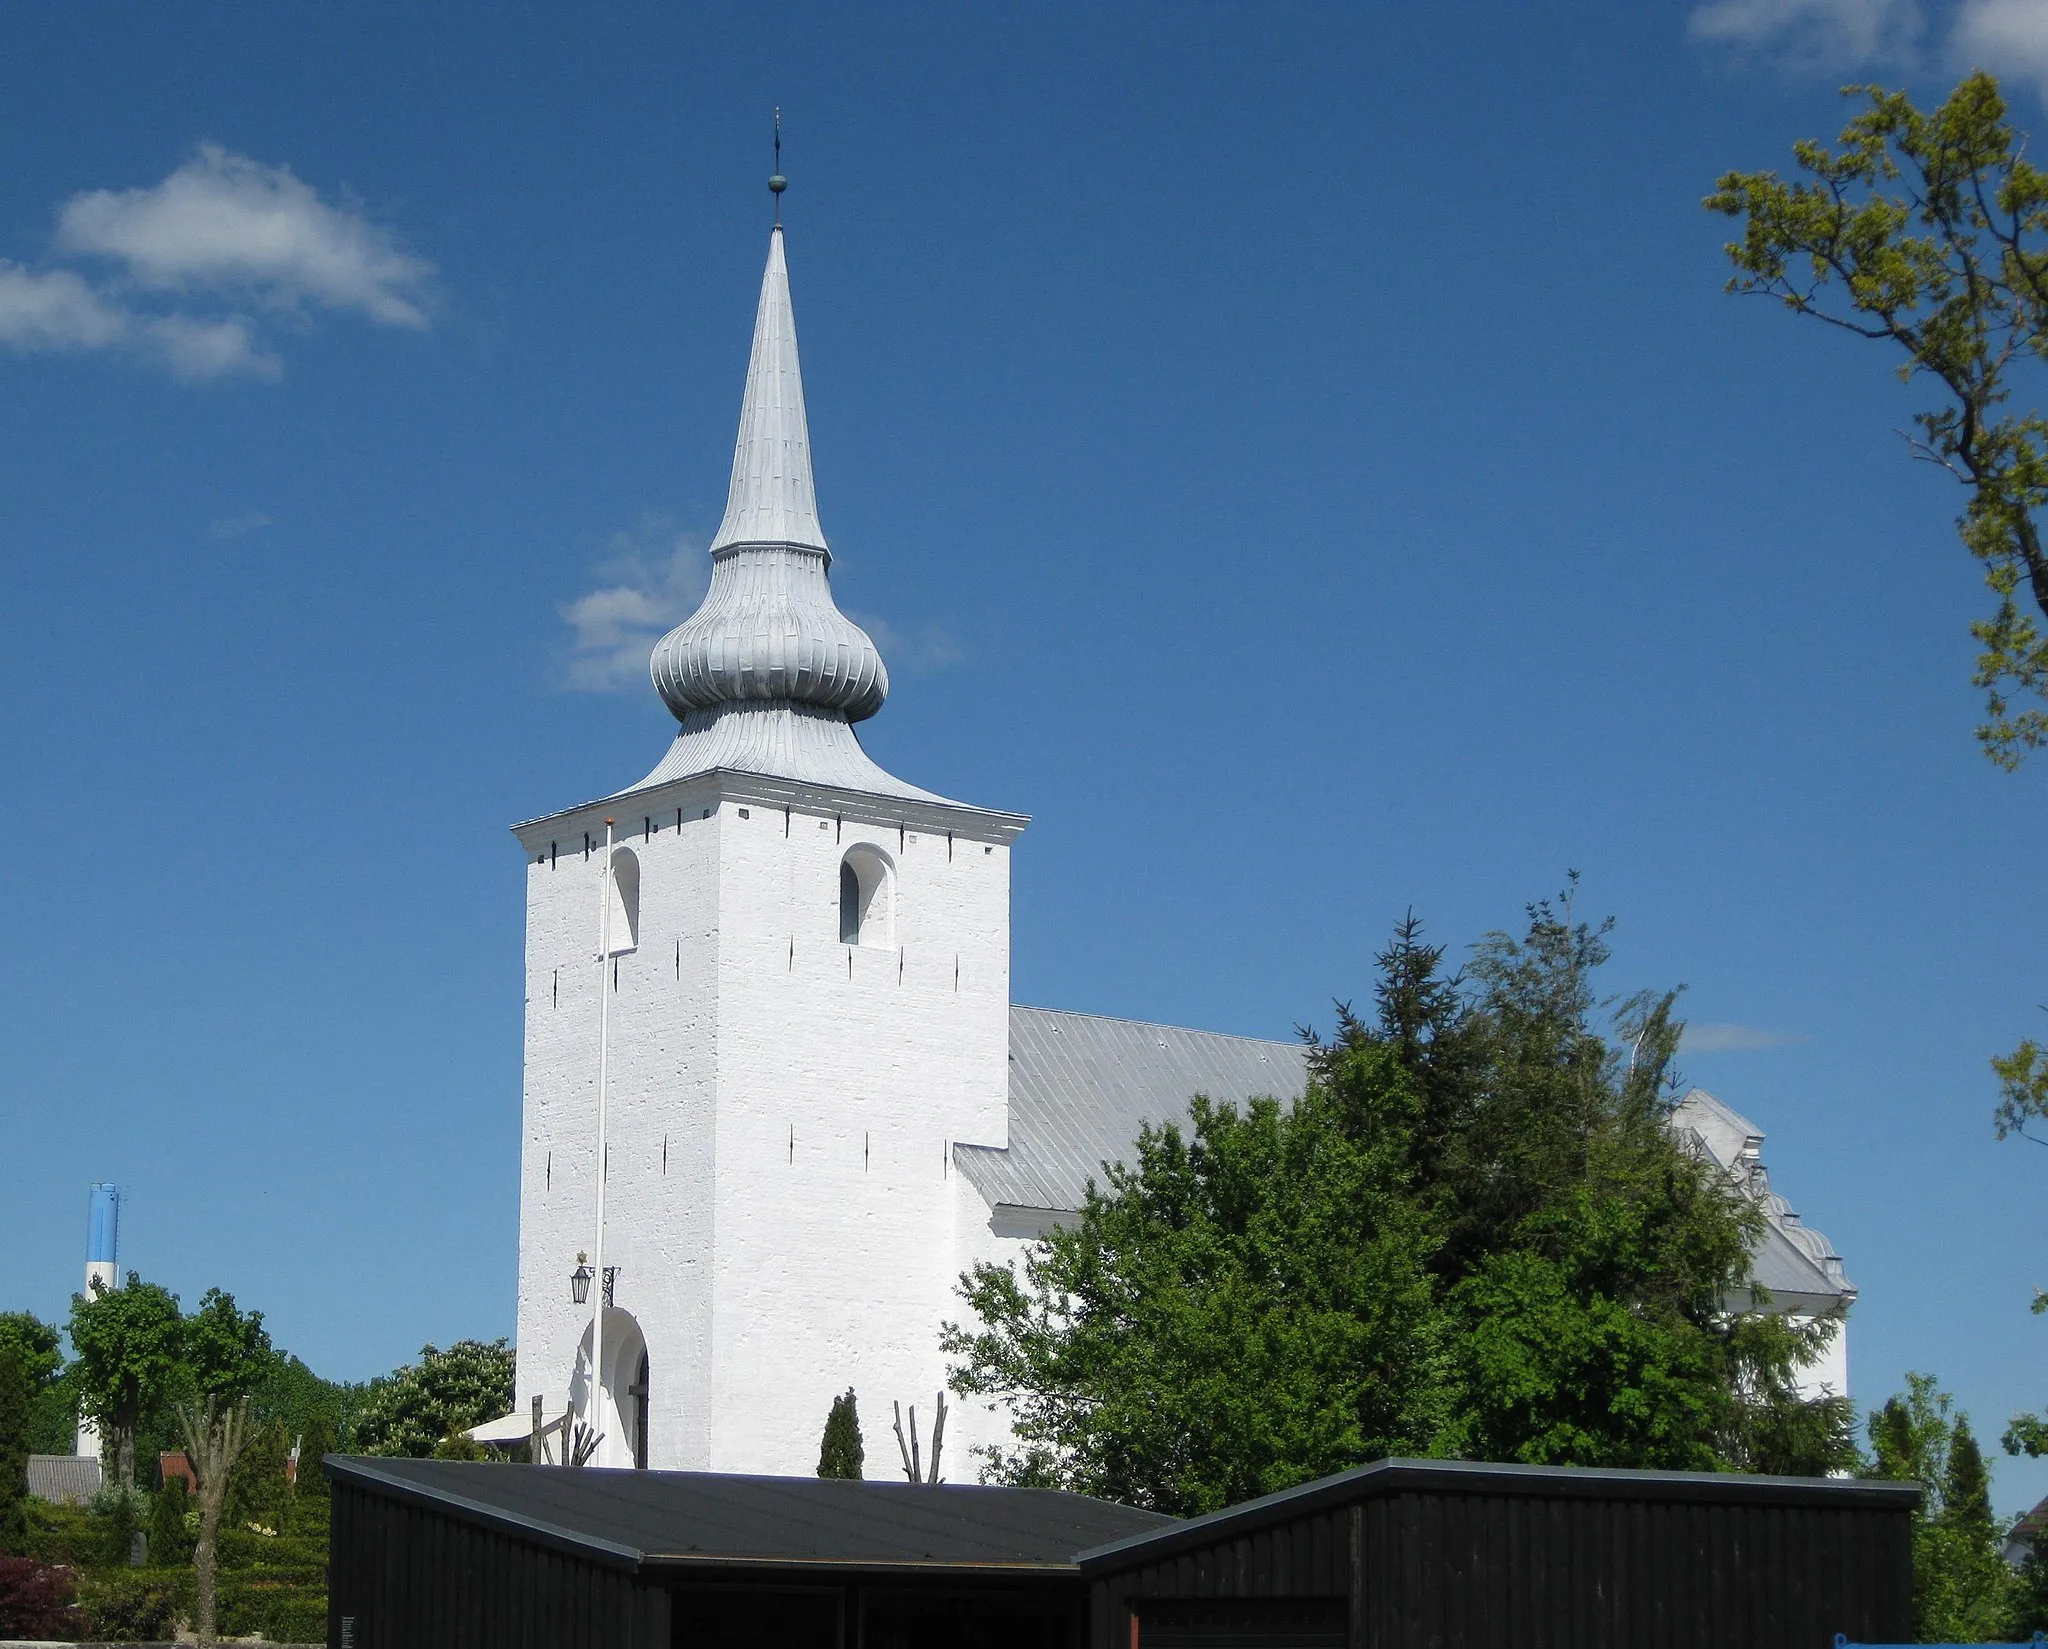 Photo showing: The church "Bredsten Kirke" in the small town "Bredsten". The town is located in South-Central Jutland, Denmark.